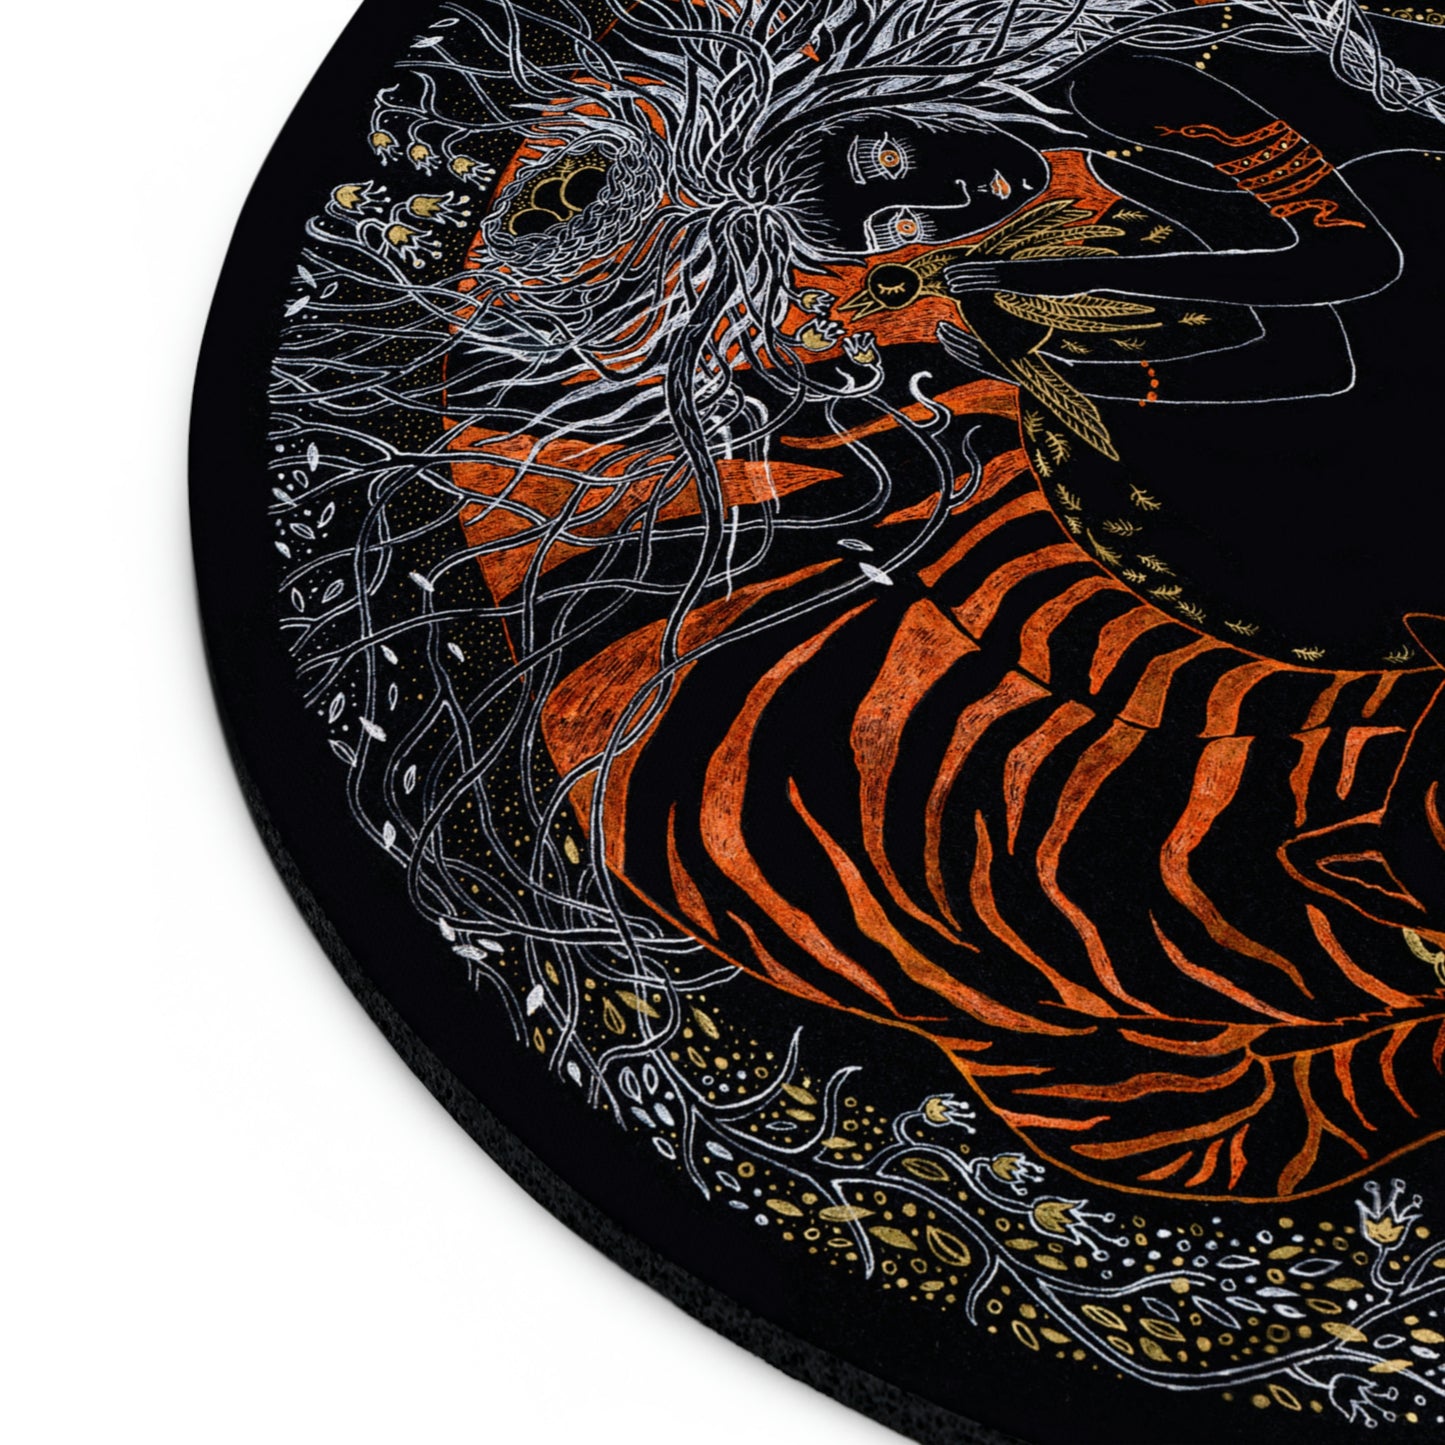 Chinese Zodiac Sign Mouse Pad (Tiger)